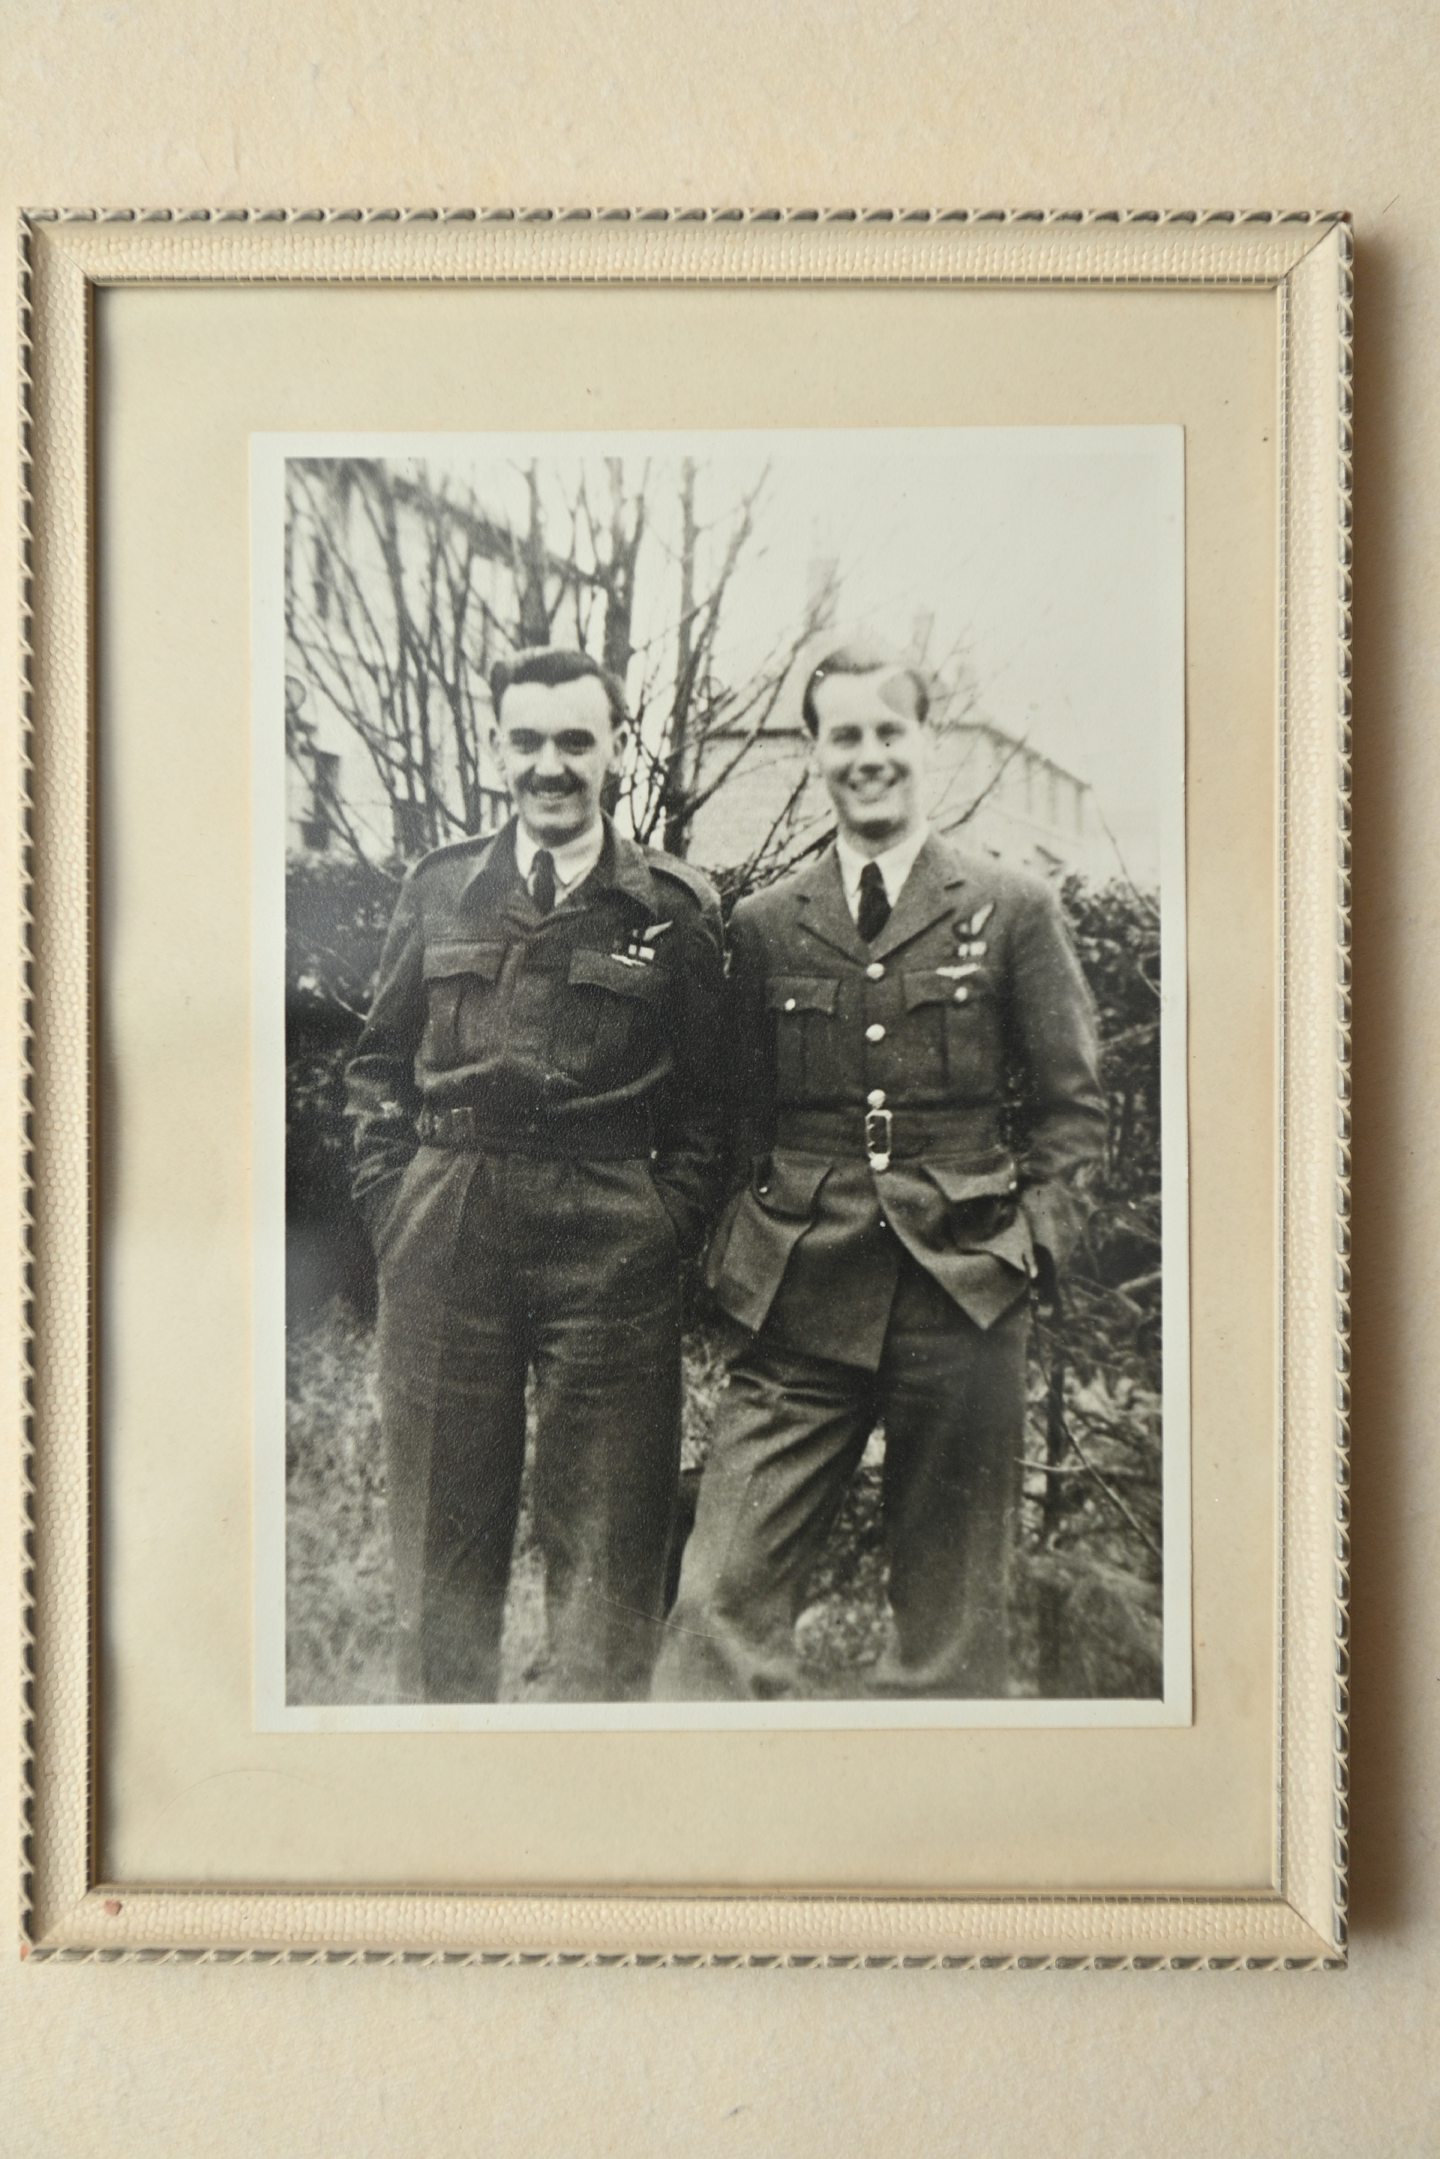  Bill, right, with Norman Piercy, both in uniform.